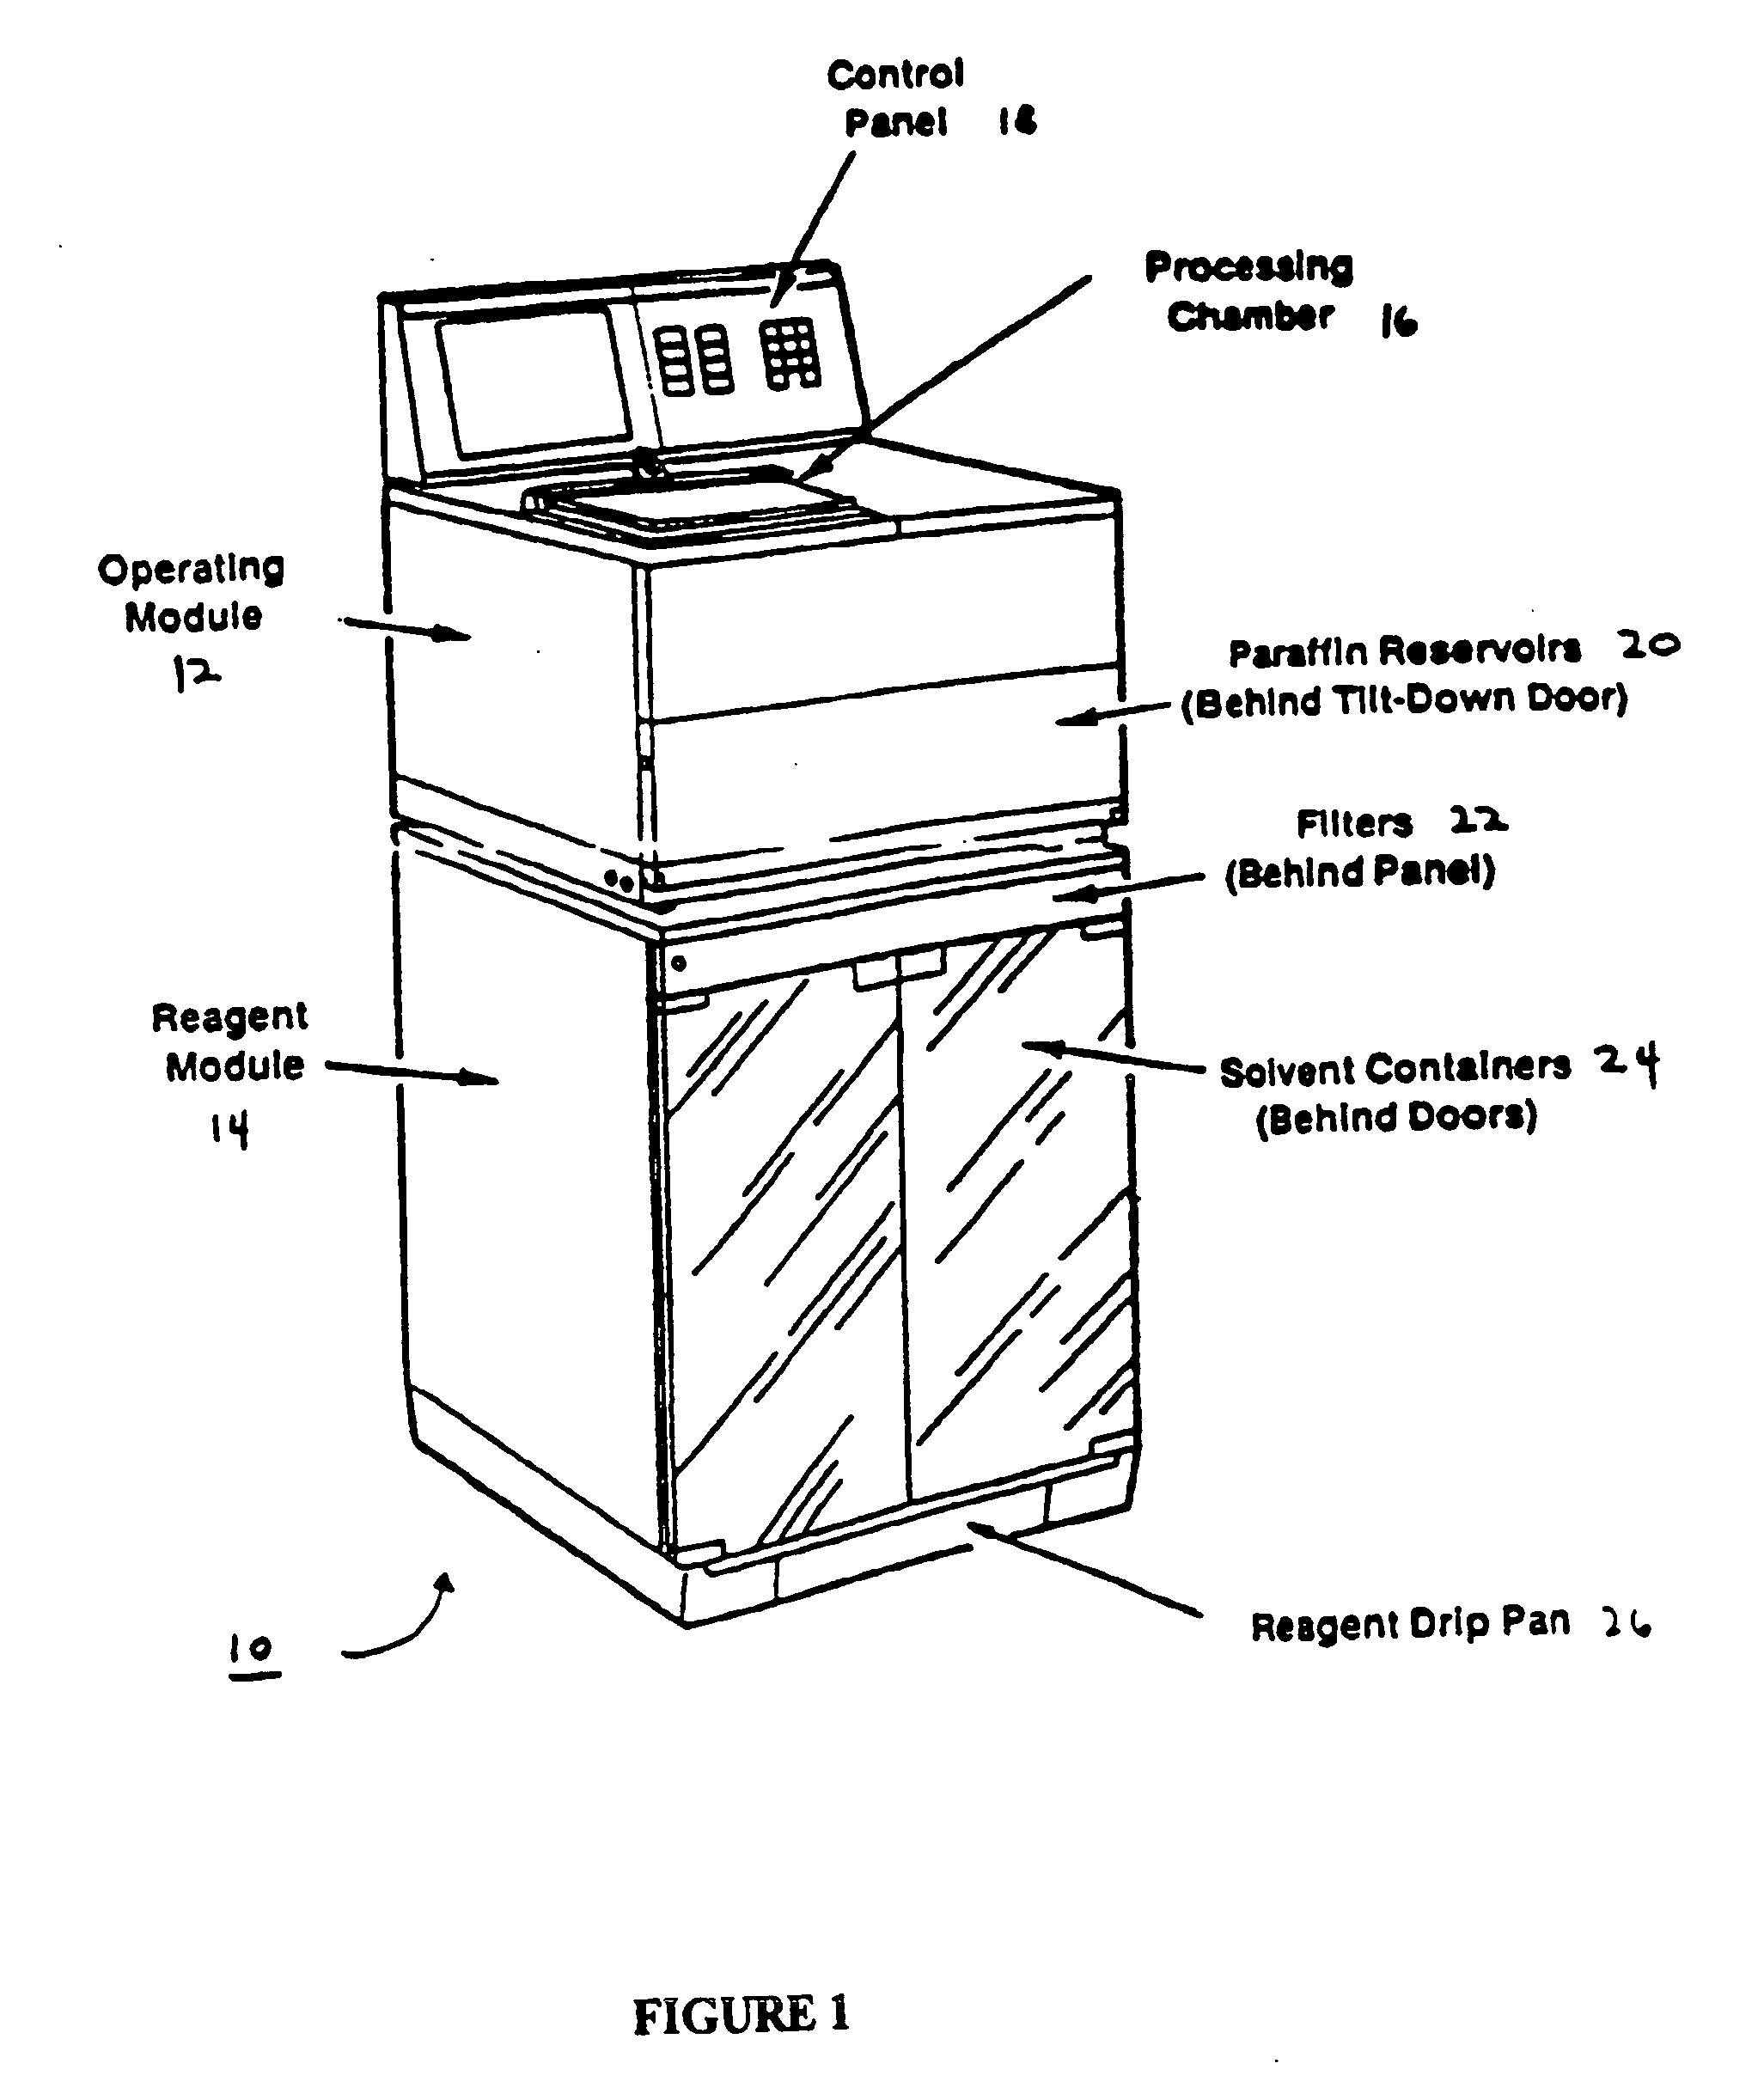 Method and apparatus for automated reprocessing of tissue samples